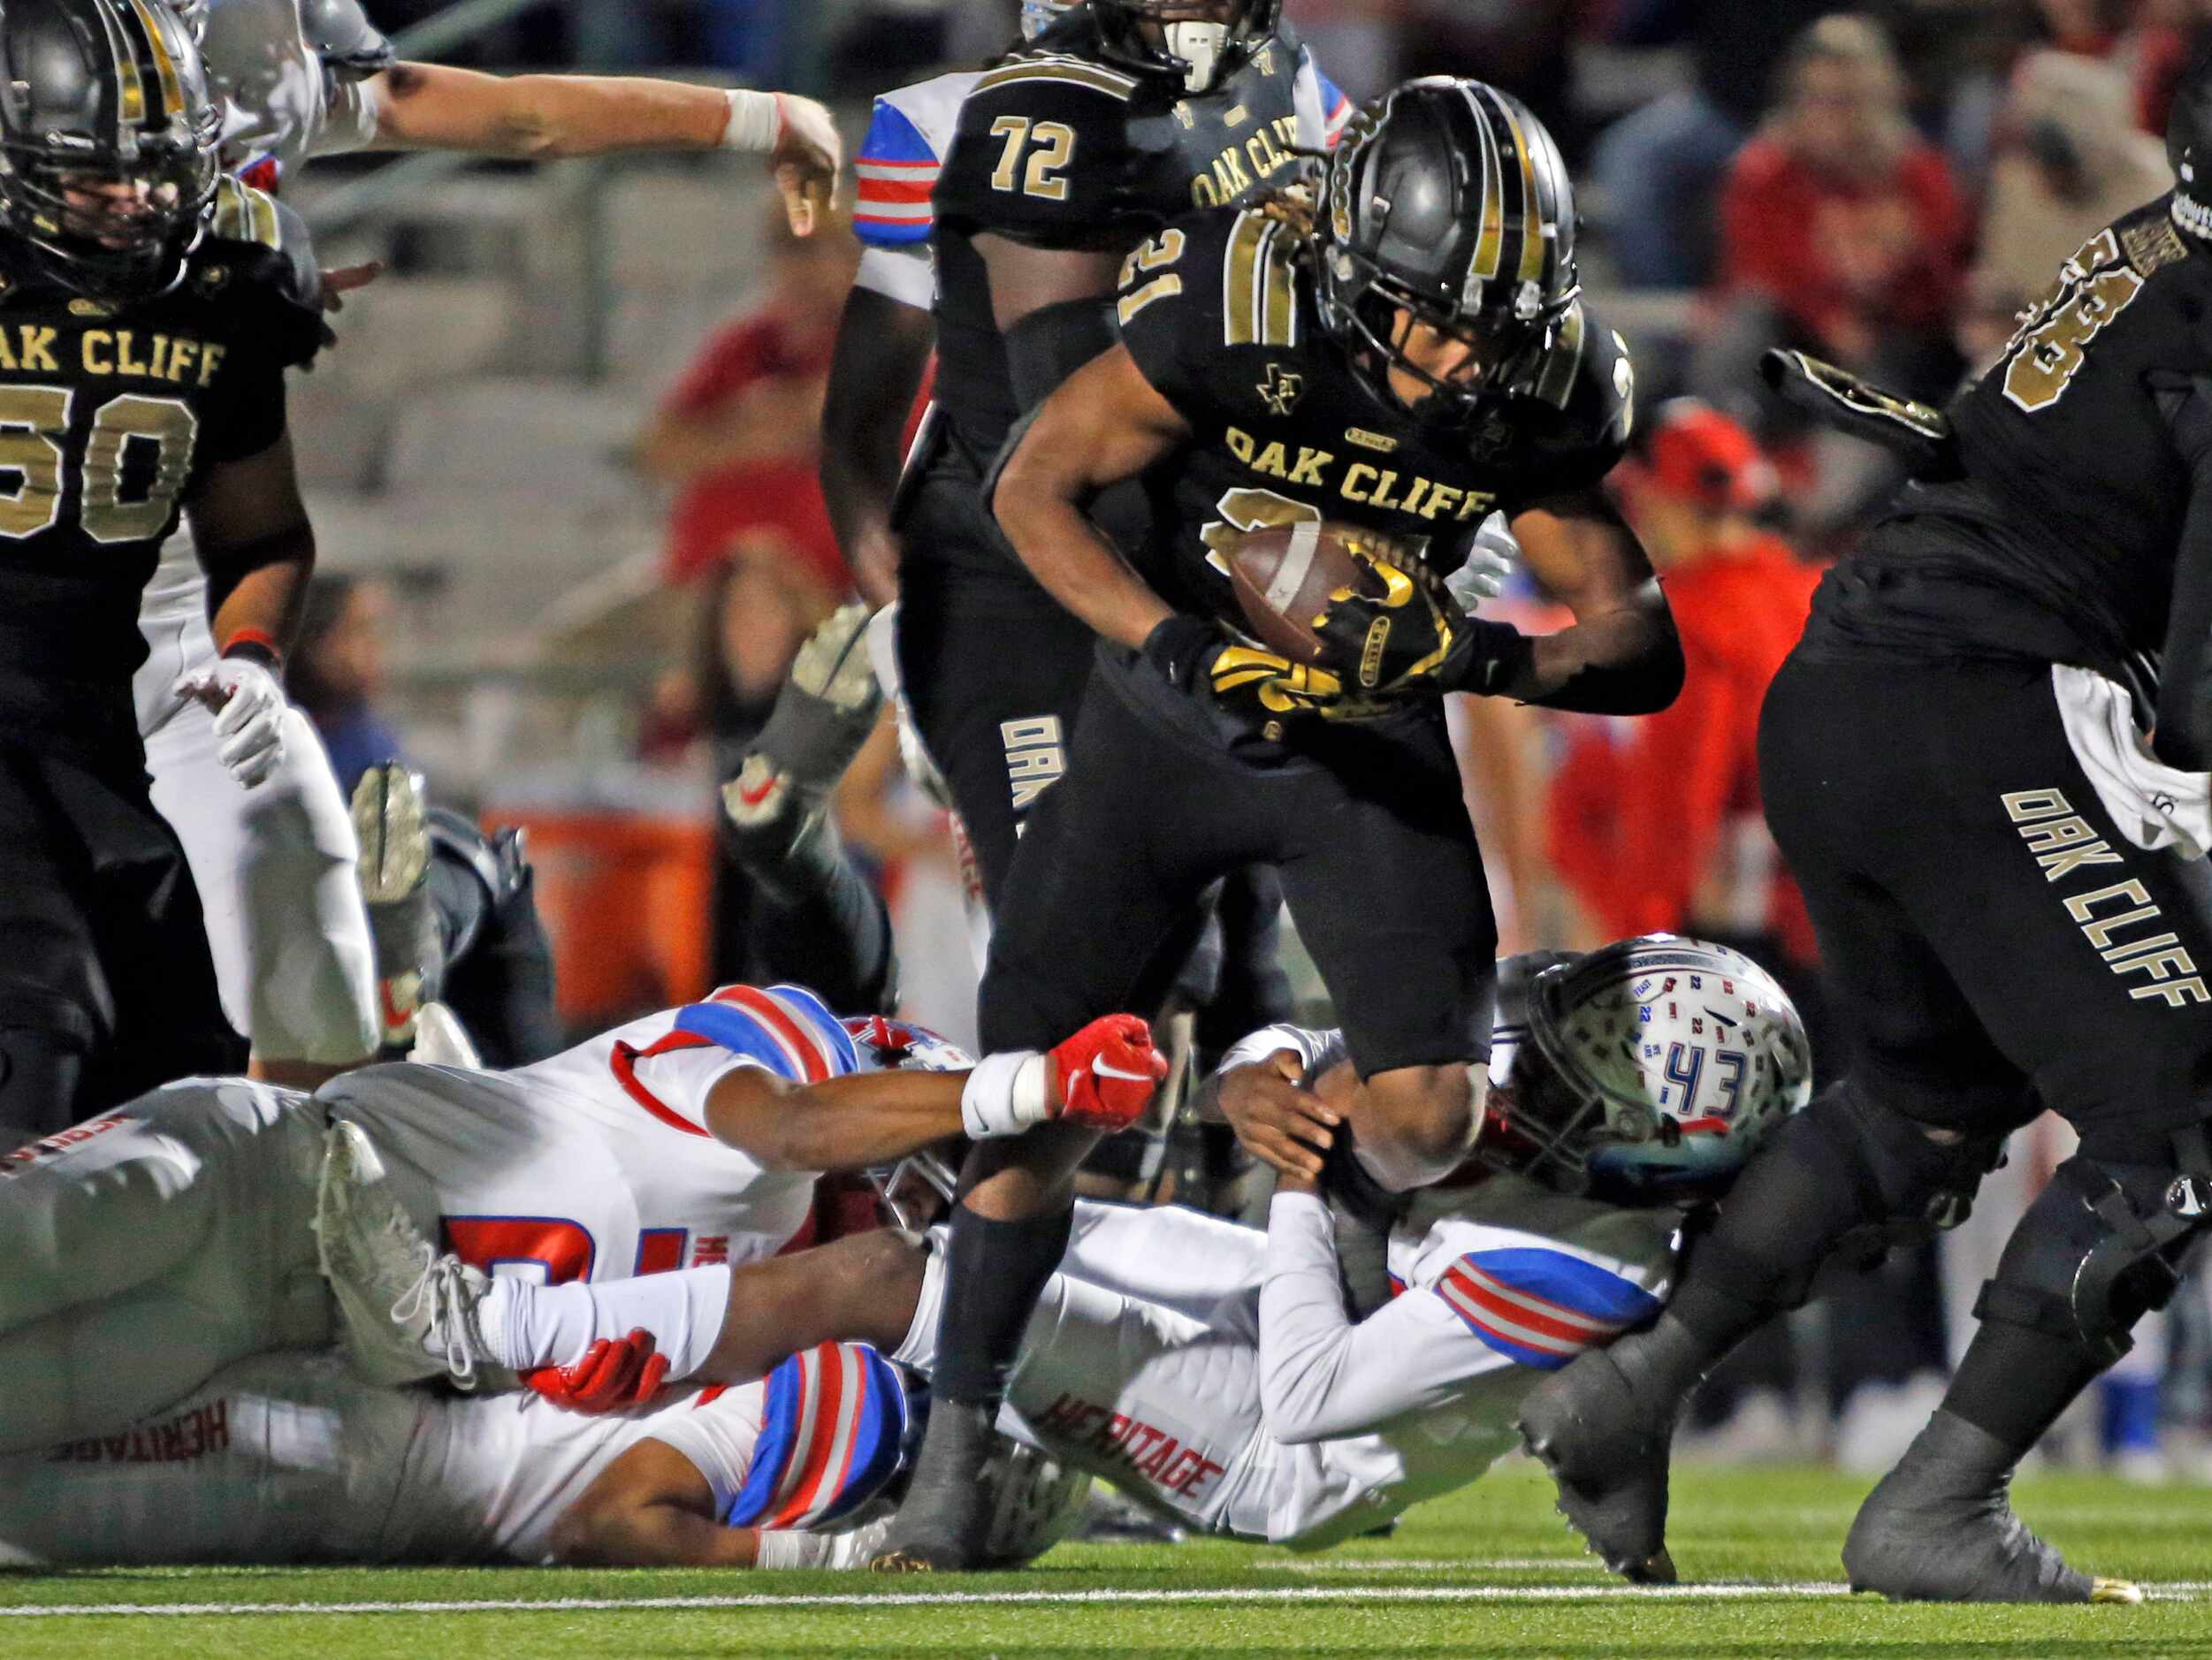 South Oak Cliff high RB Danny Green (21) breaks tackles in route to a touchdown during the...